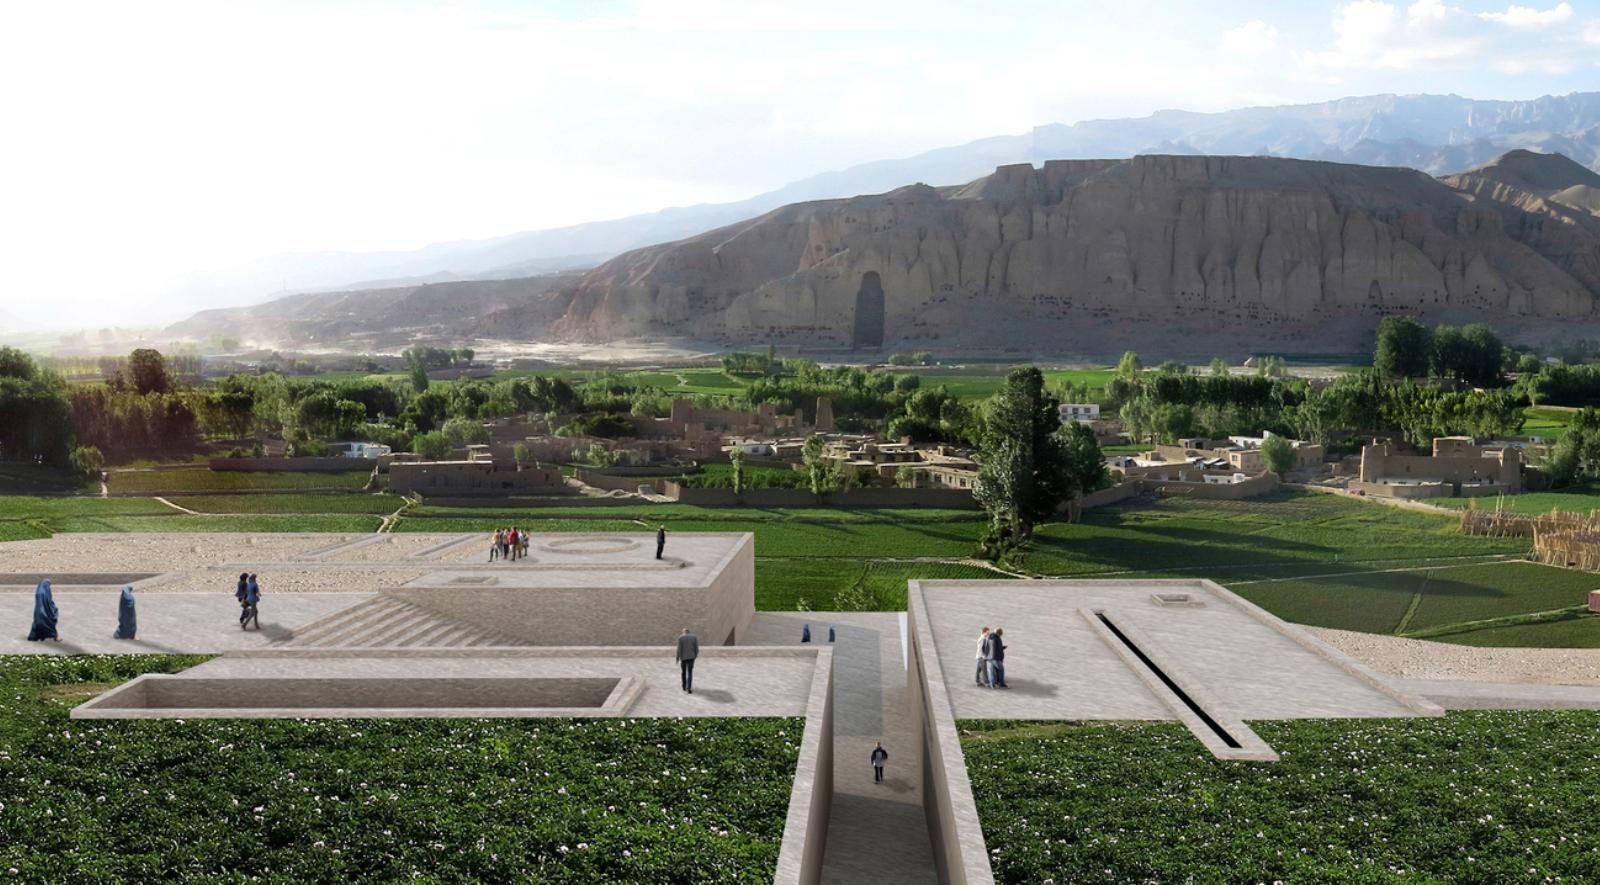 The Bamiyan Cultural Centre in Afghanistan